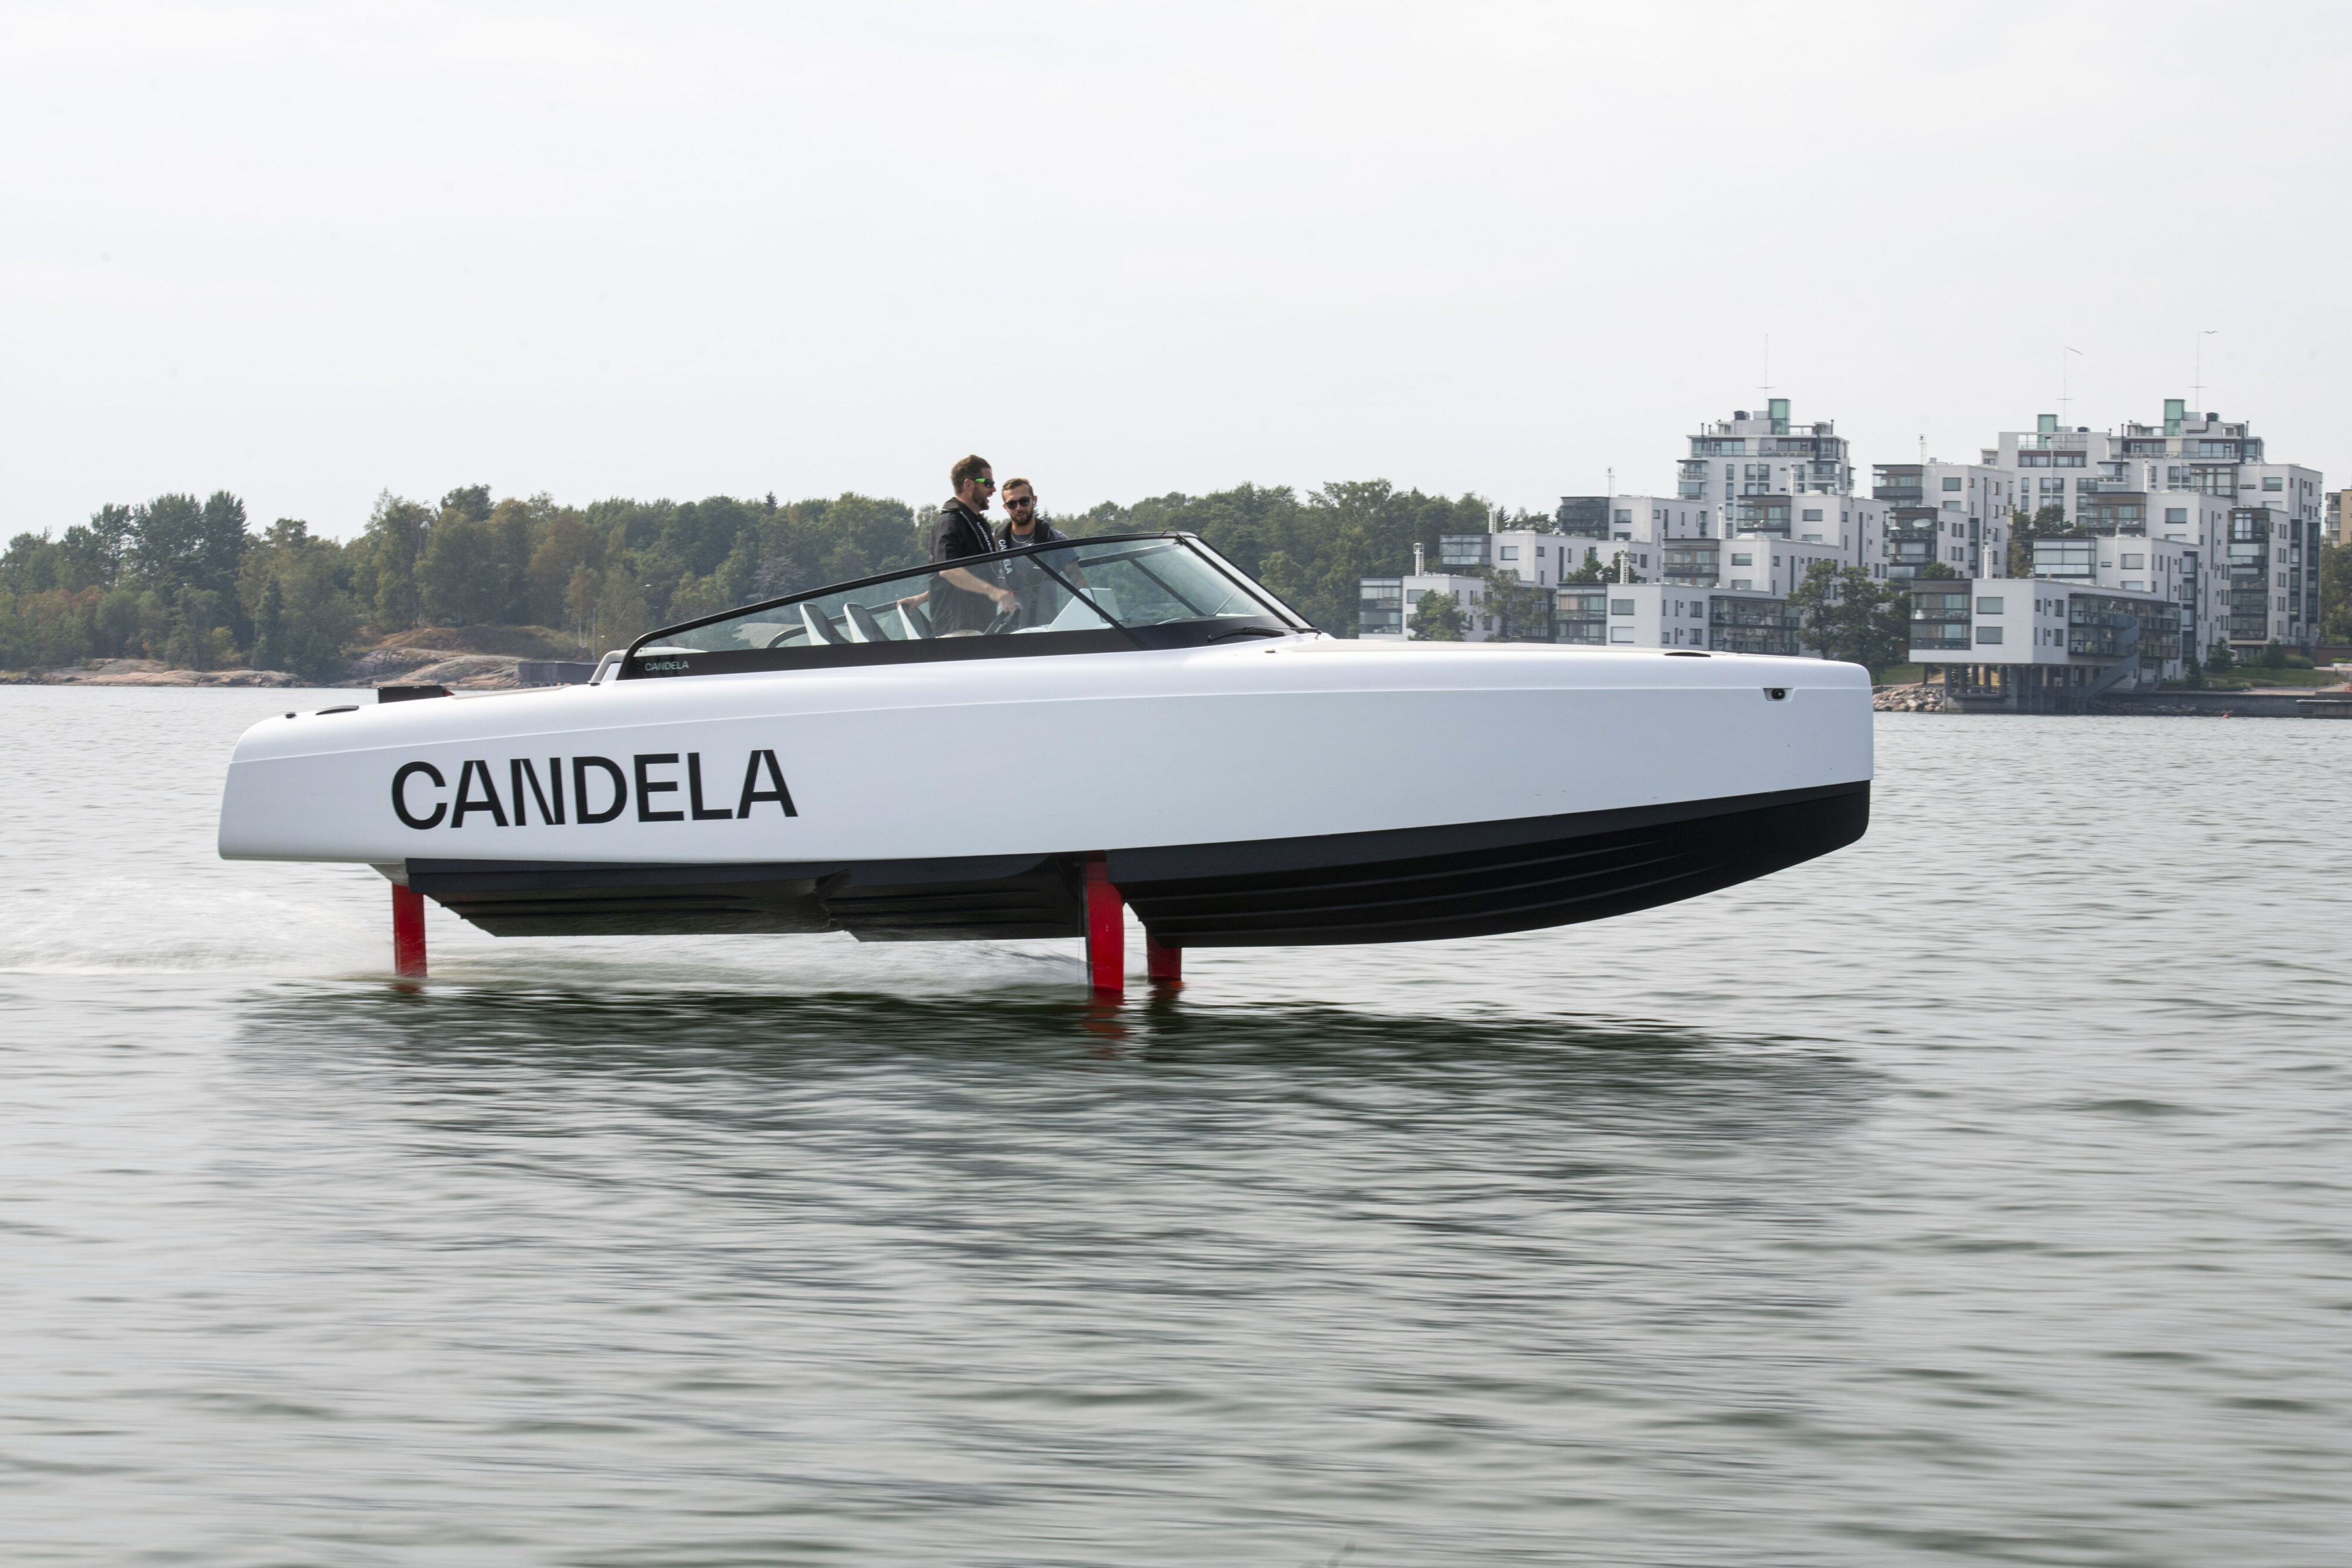 A Candela hydrofoil powered by Polestar batteries on the water